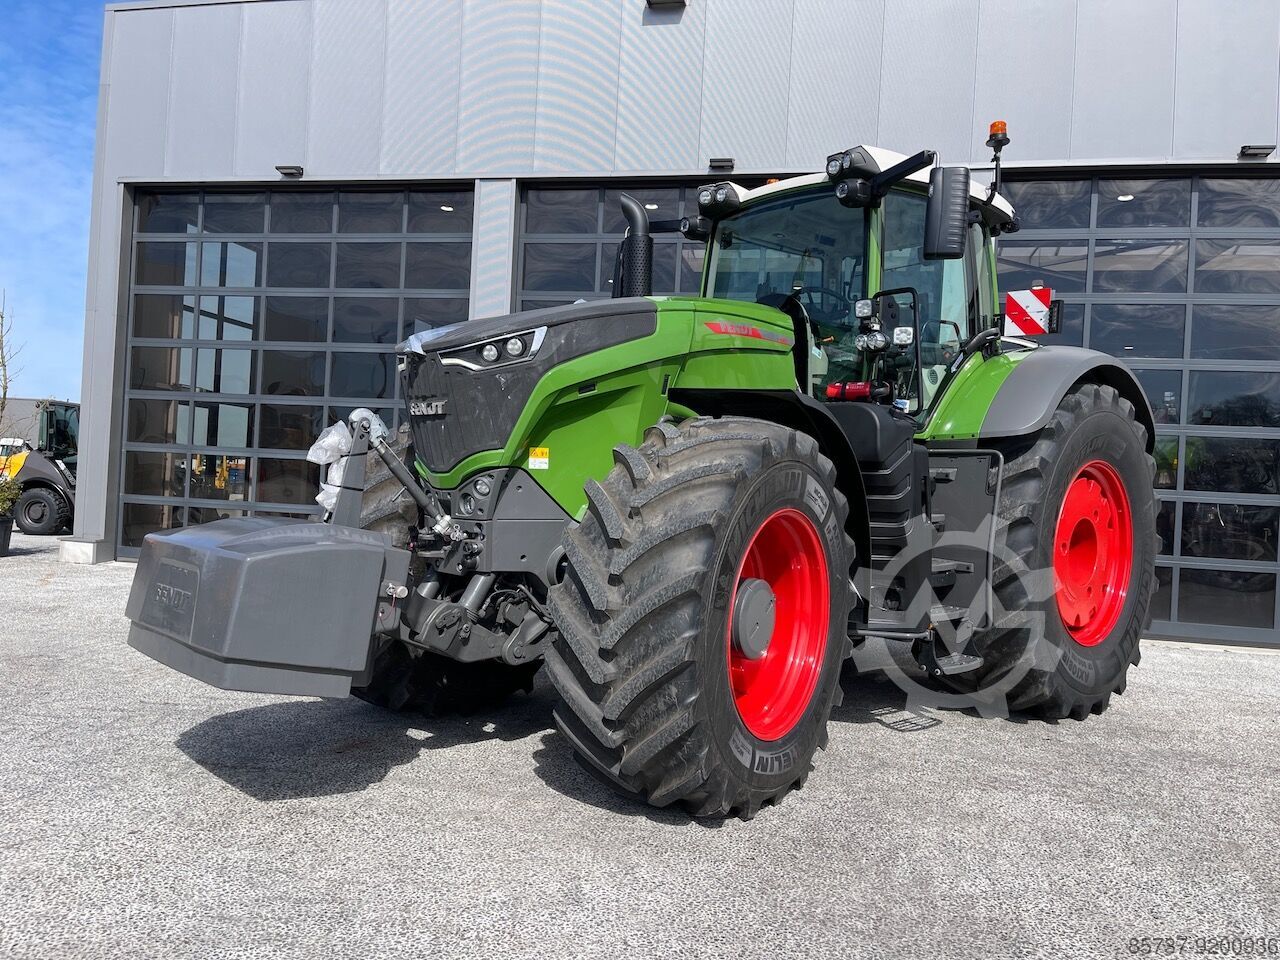 Fendt Certified: High-quality second-hand machines with warranty